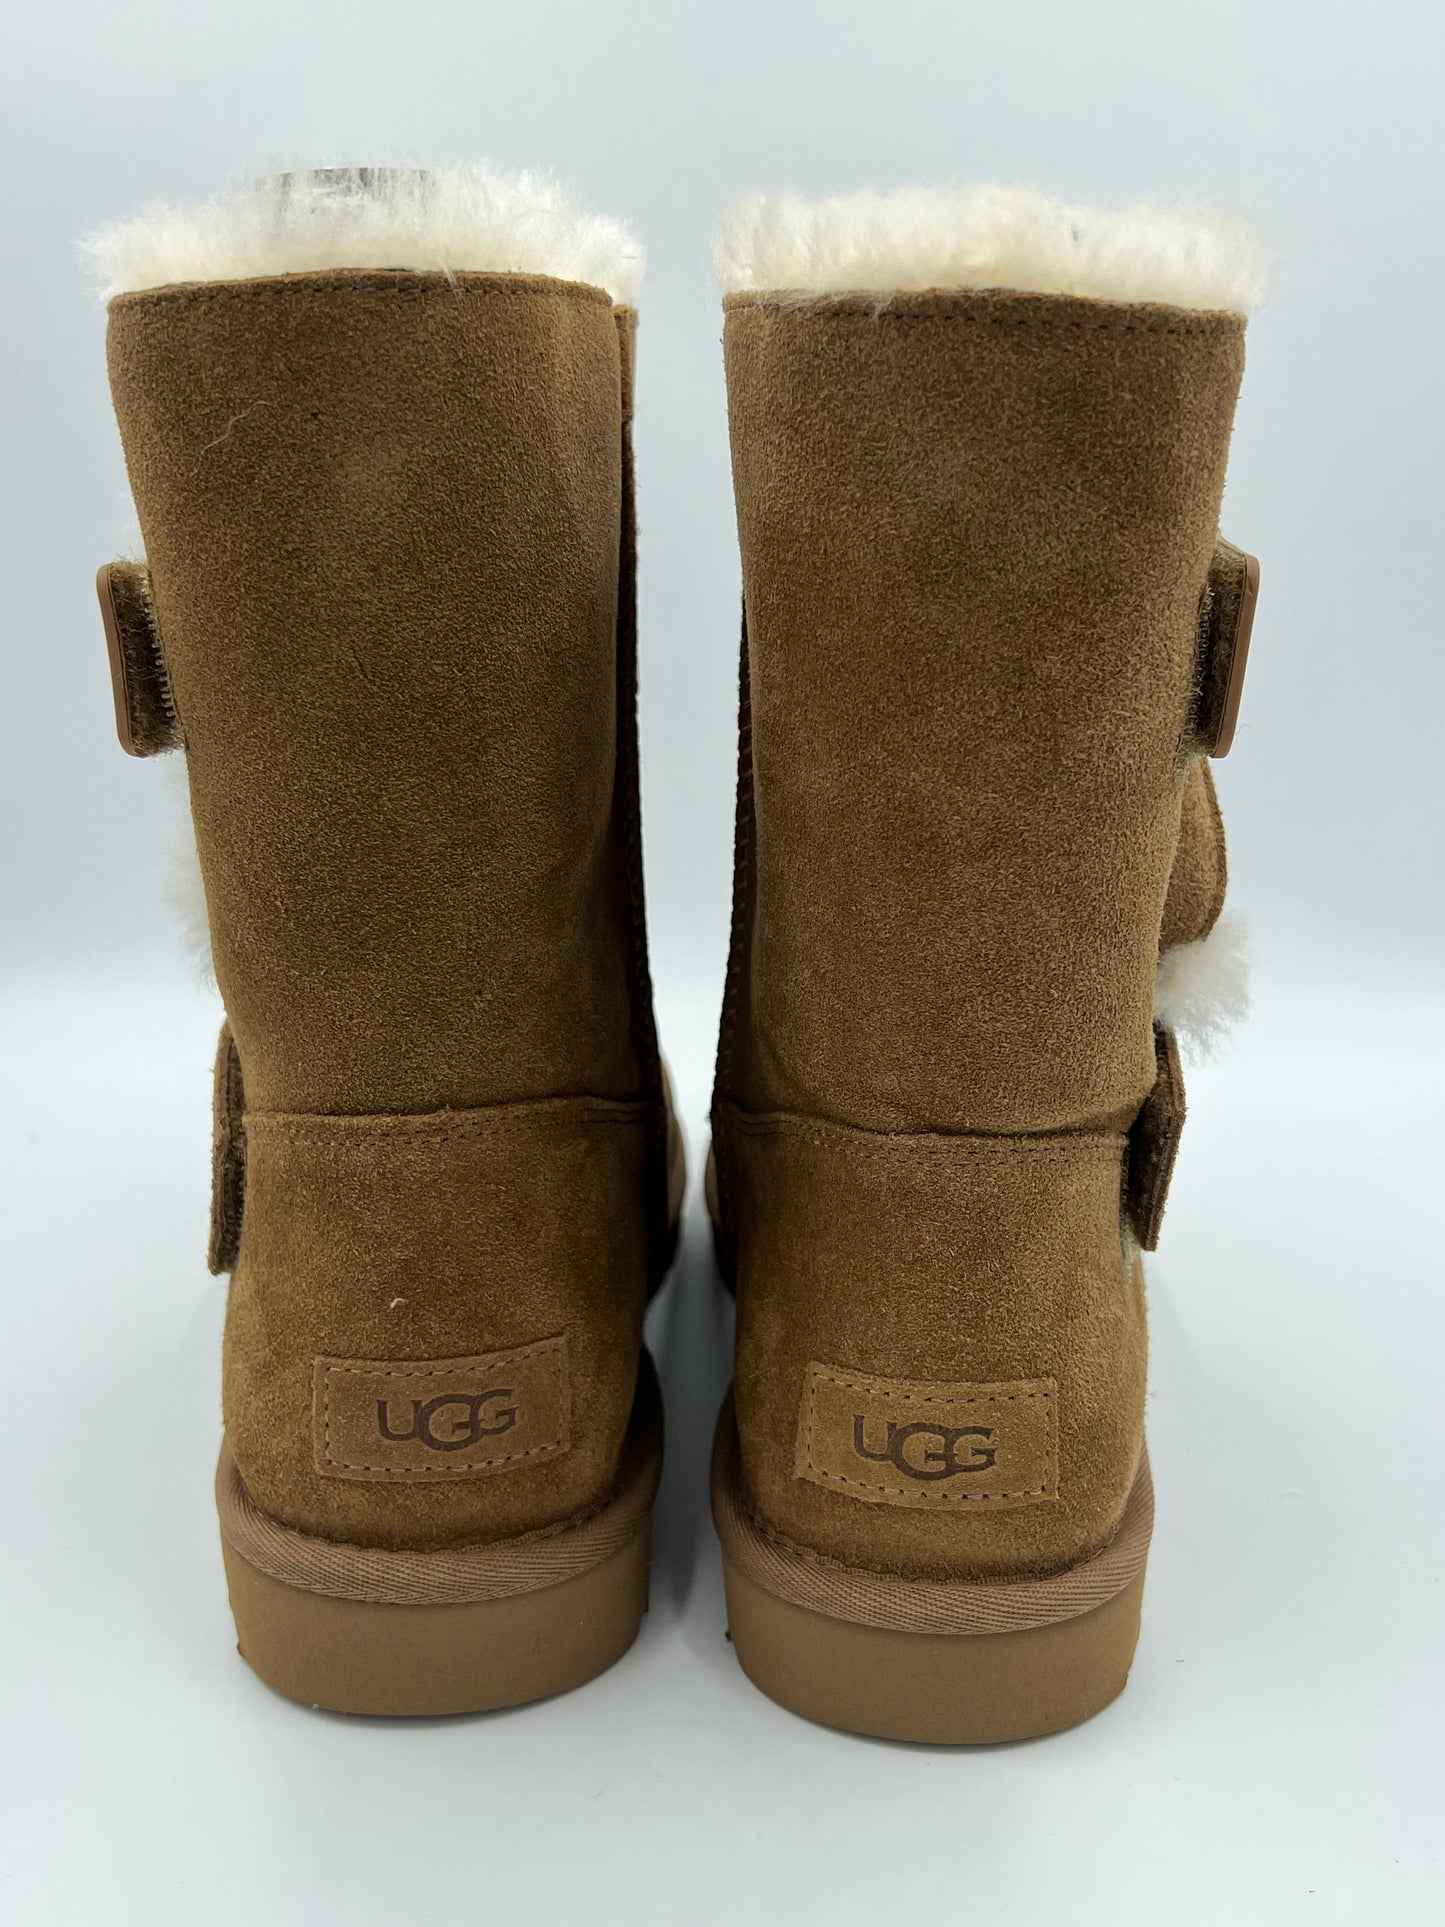 New! Ugg Bailey Logo Strap Boots, Size 10